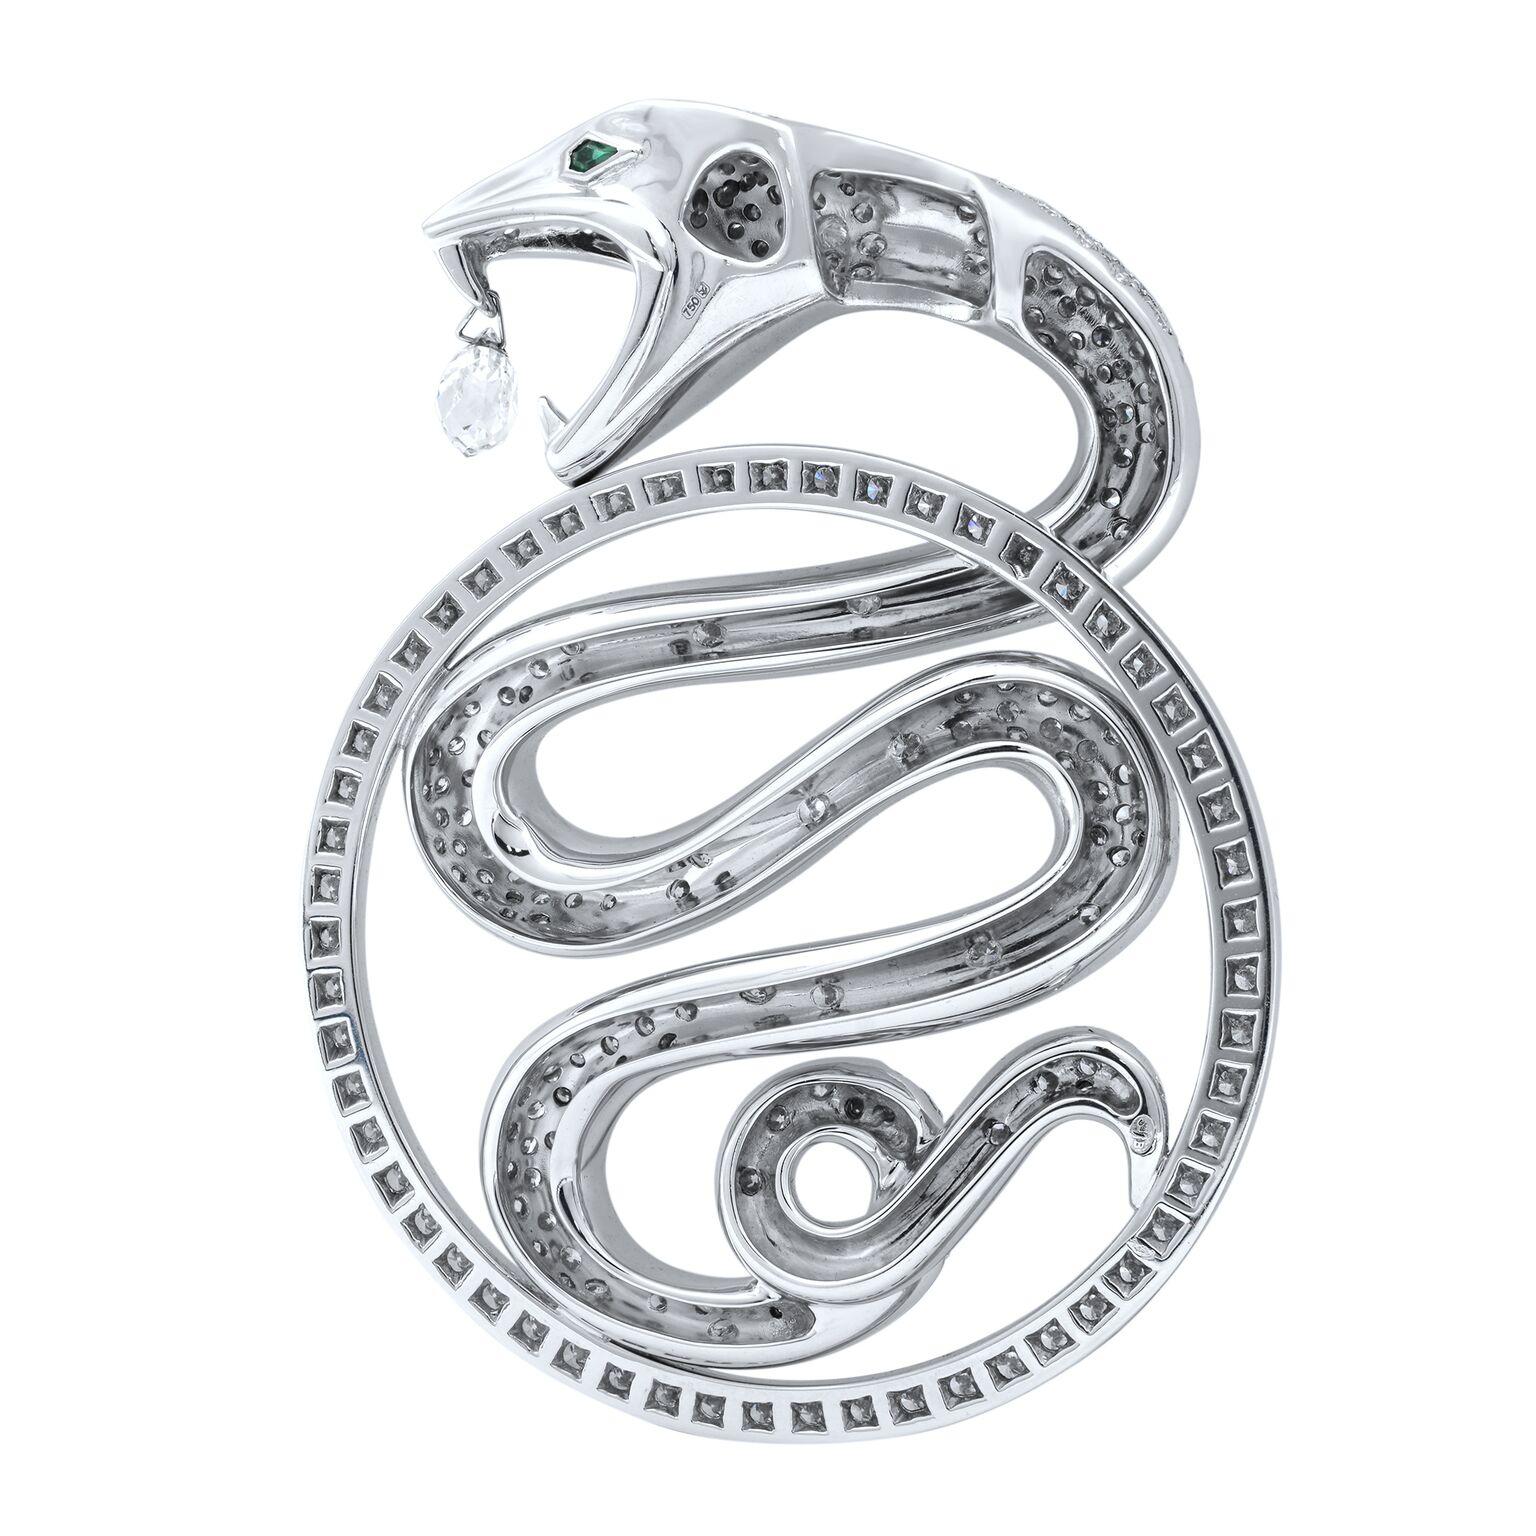 This is a precious 18k white gold Trouble pendant from Boucheron. The snake, an iconic guardian and a cultural symbol of protection is set with emerald eyes which weight 0.05ct. The pendant has 330 pave set round brilliant cut diamonds with a total